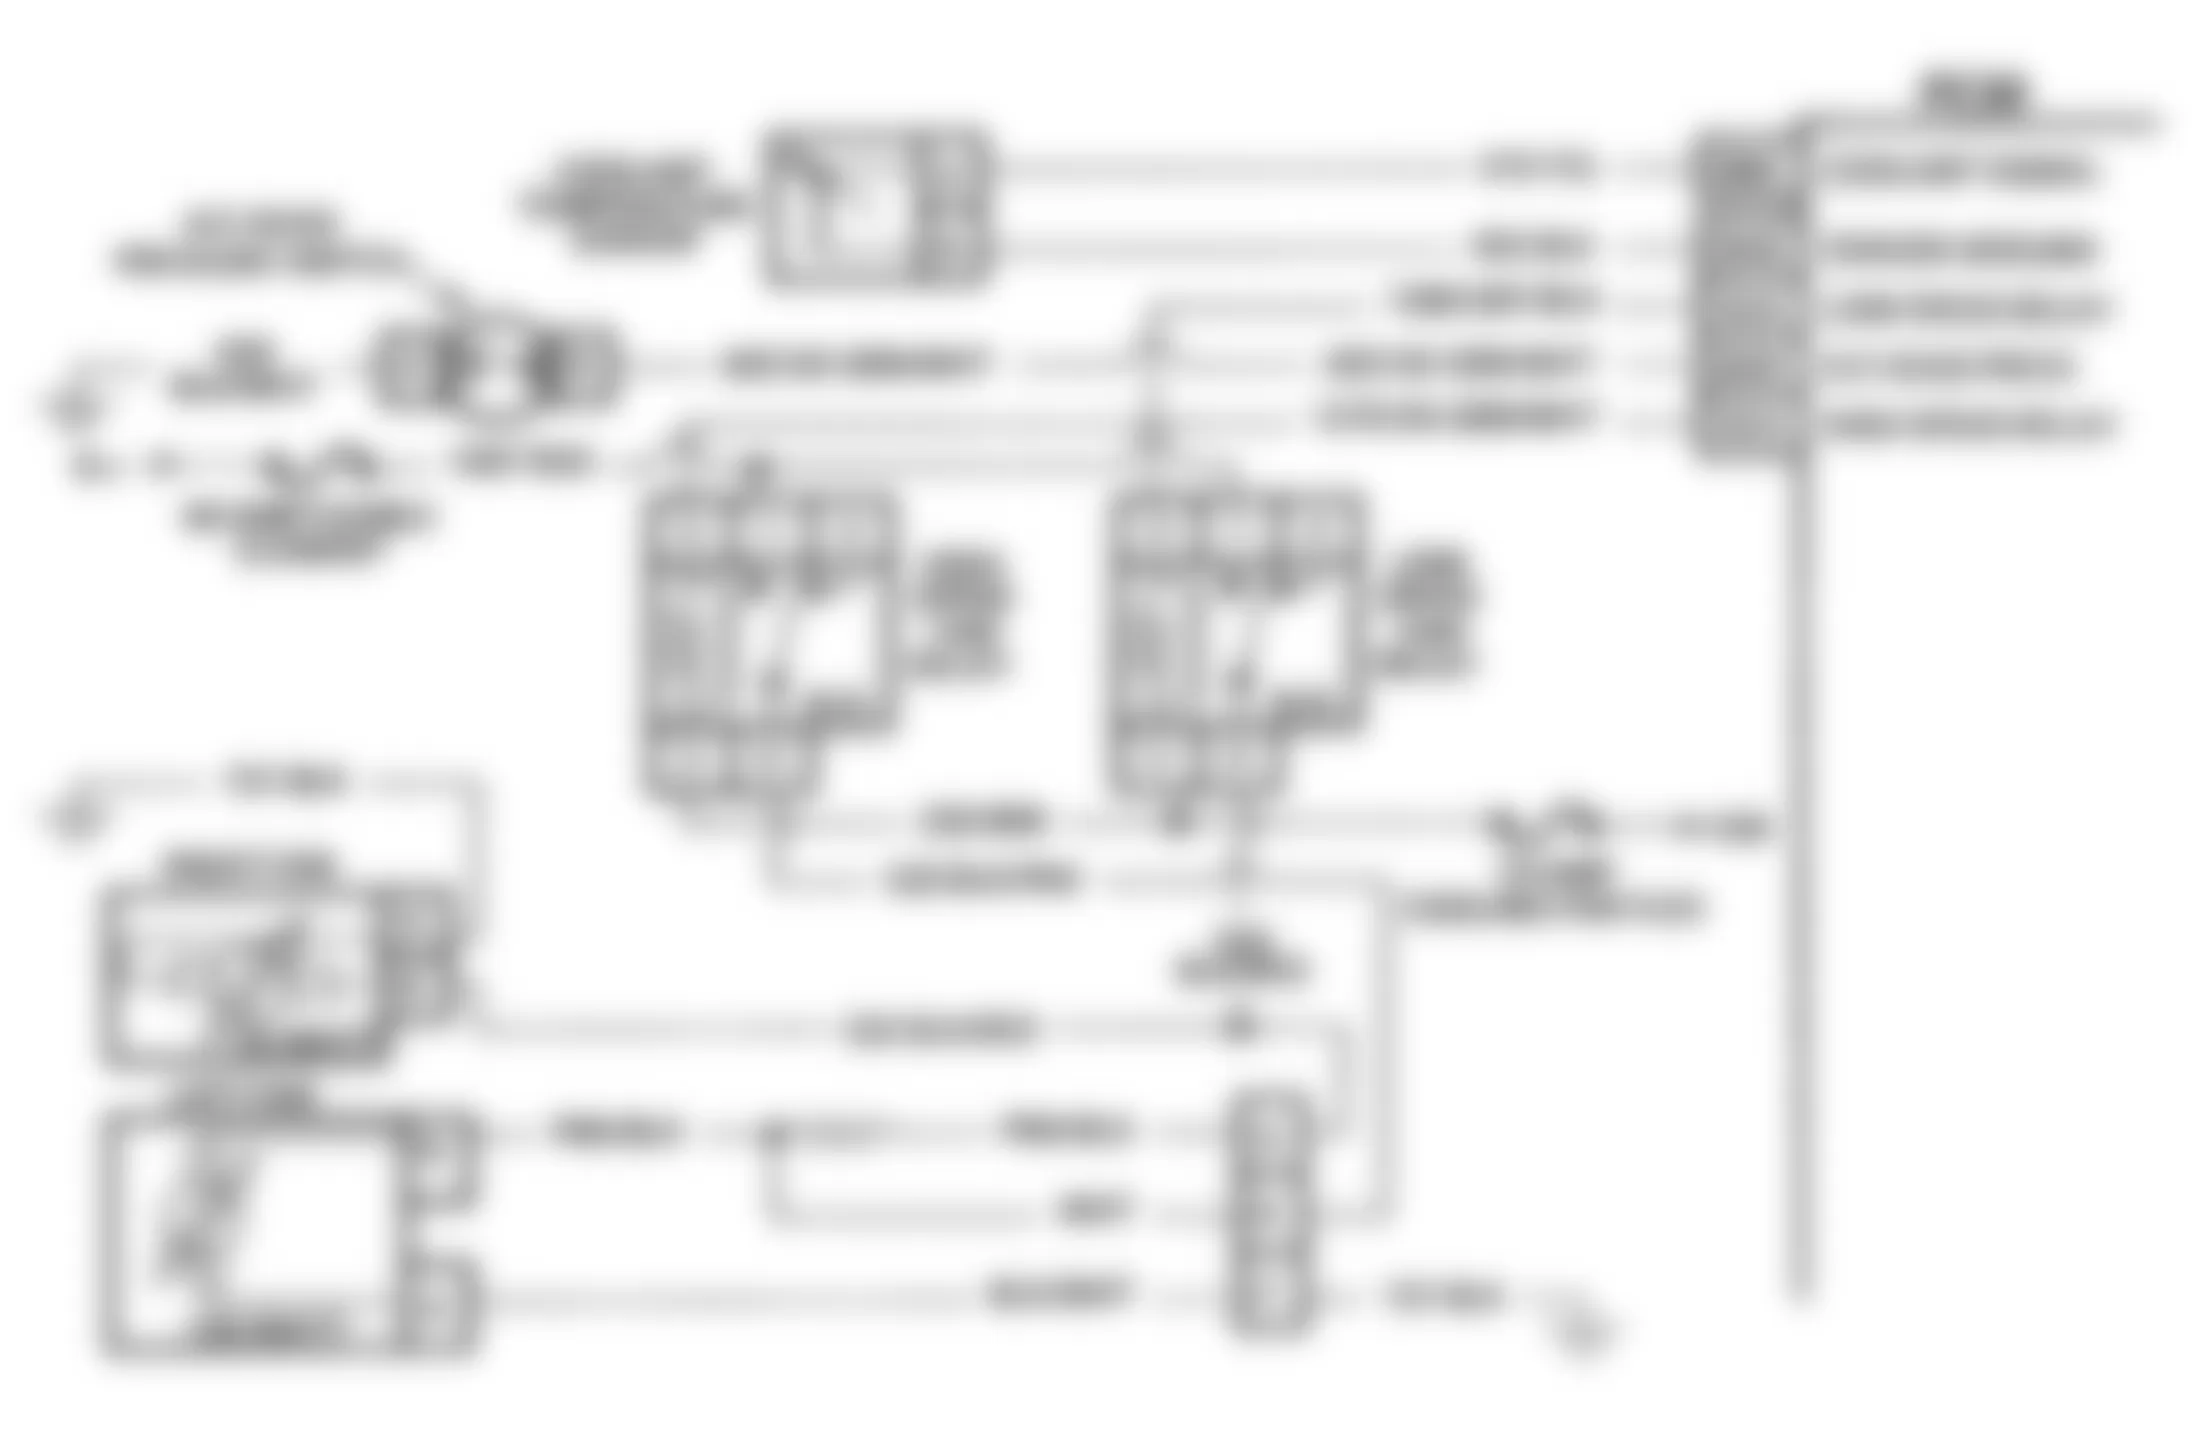 Buick LeSabre Limited 1992 - Component Locations -  Code 69, Schematic, A/C Head Pressure Switch